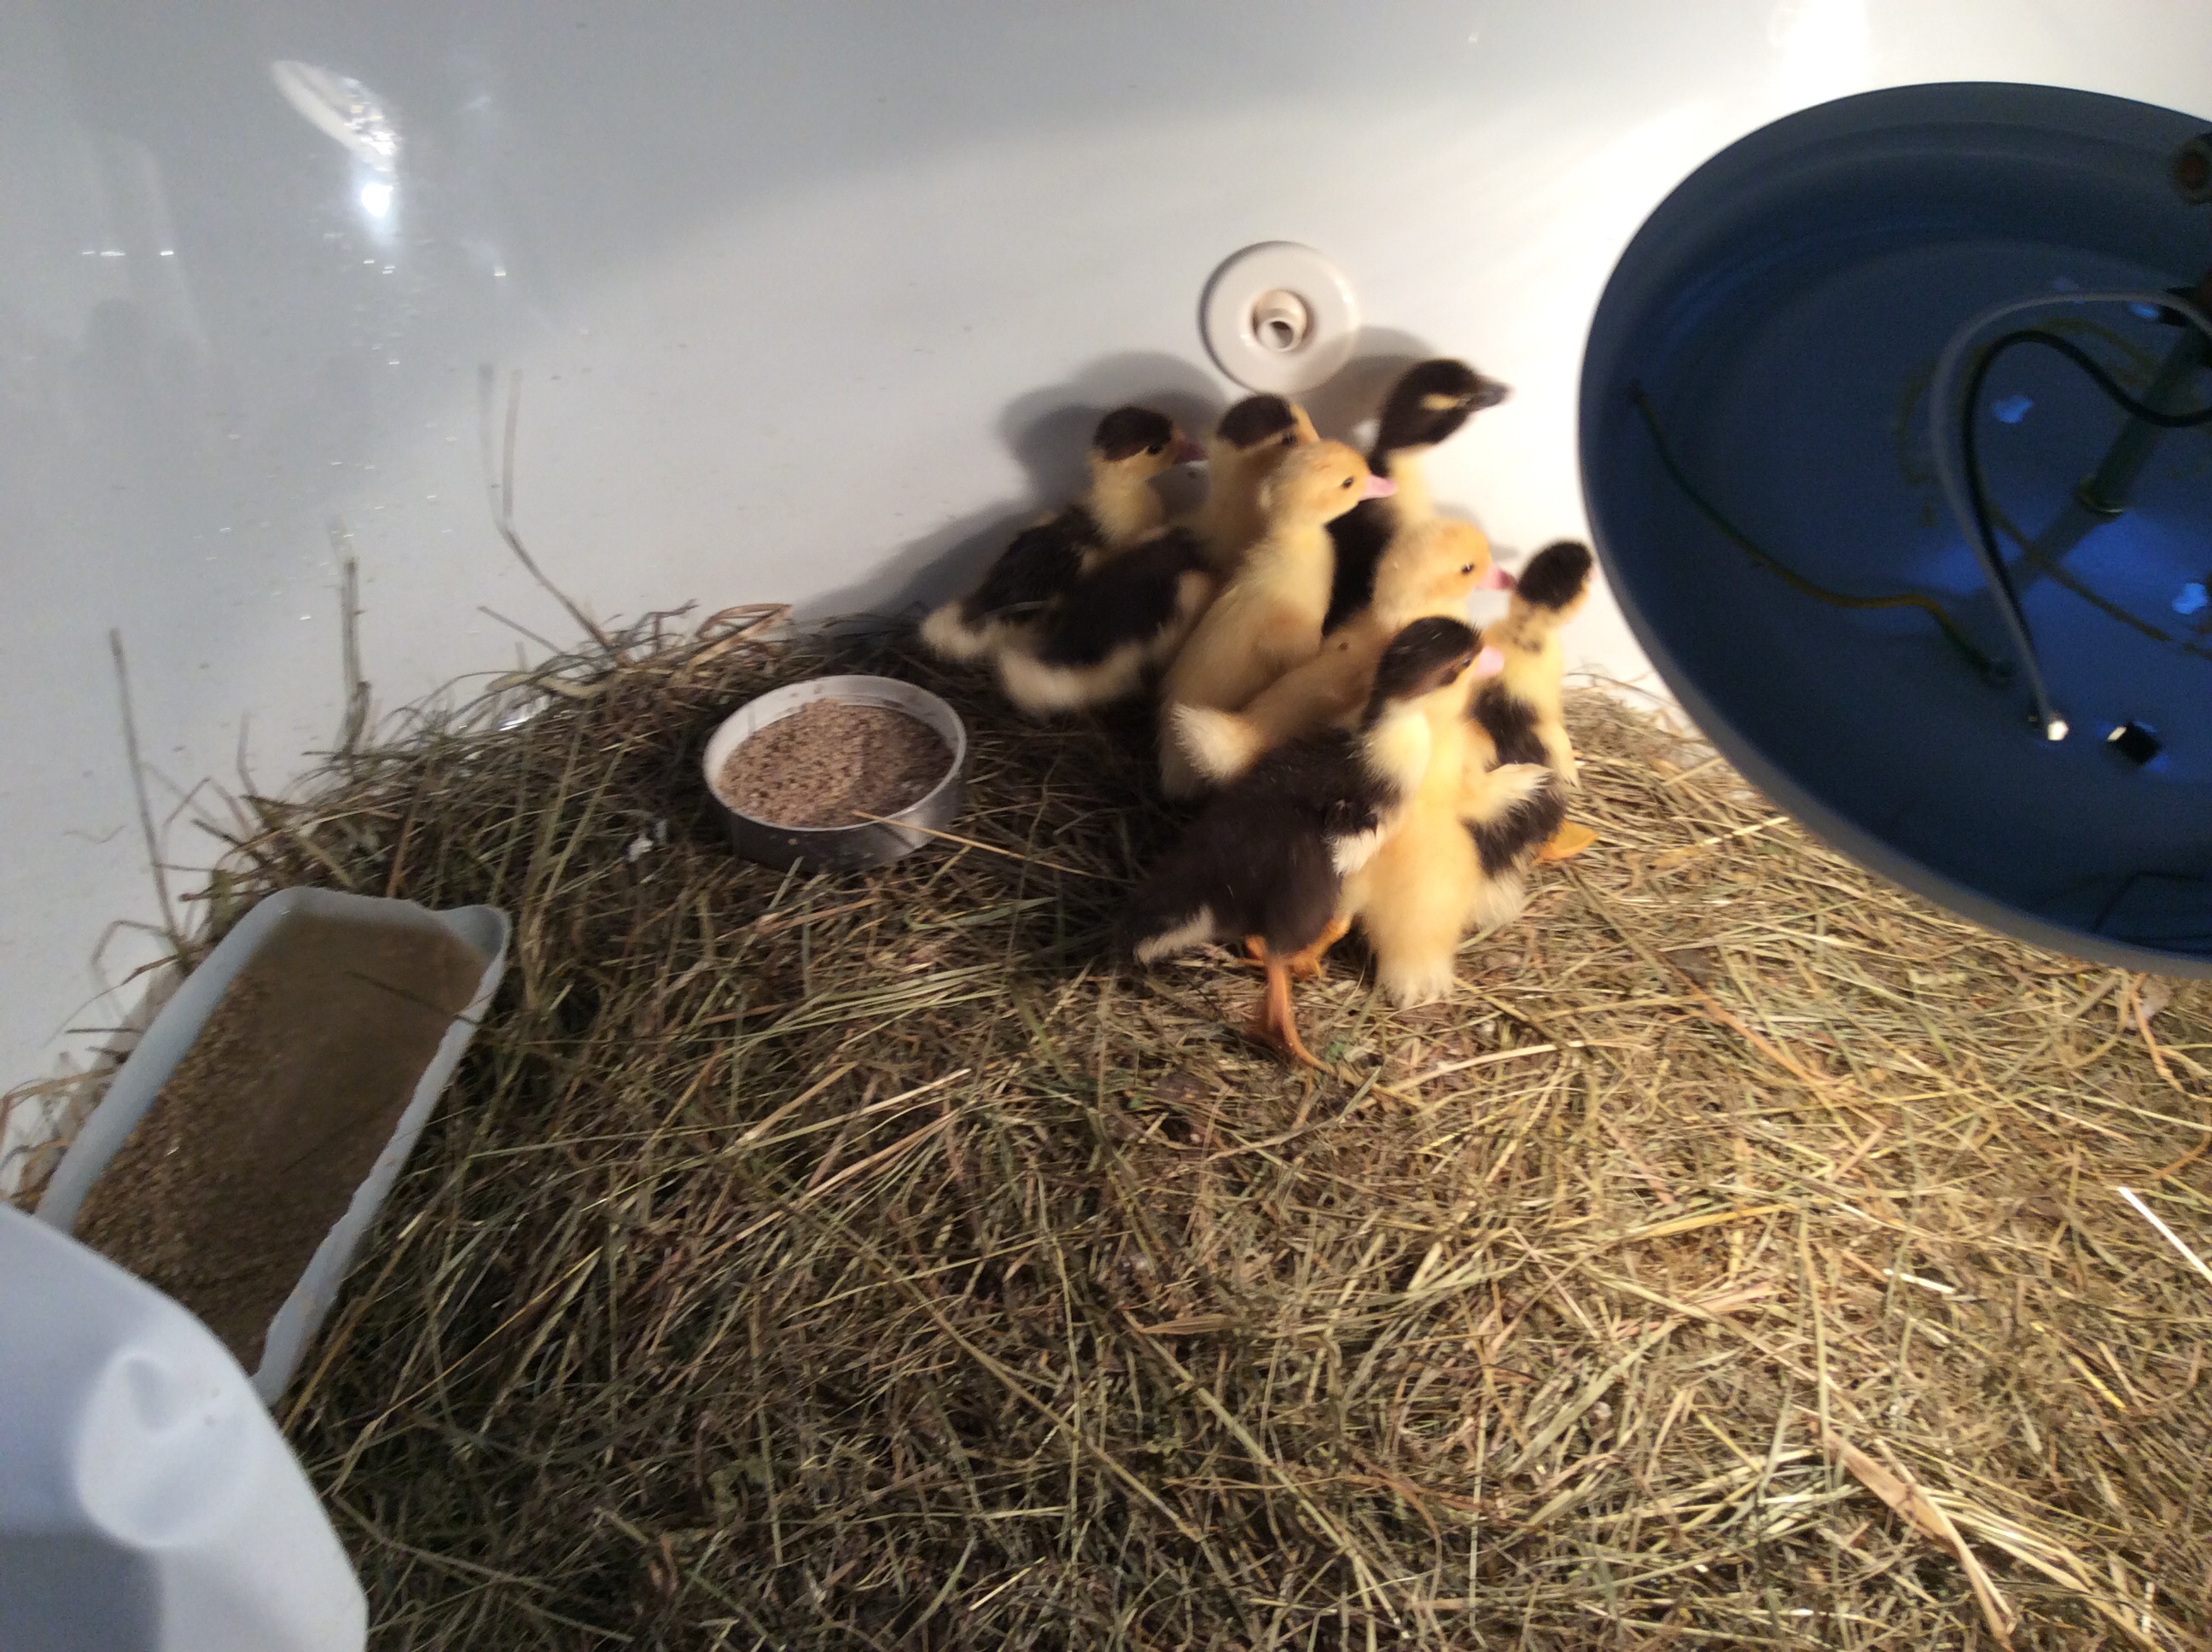 And then there were eight little ducklings